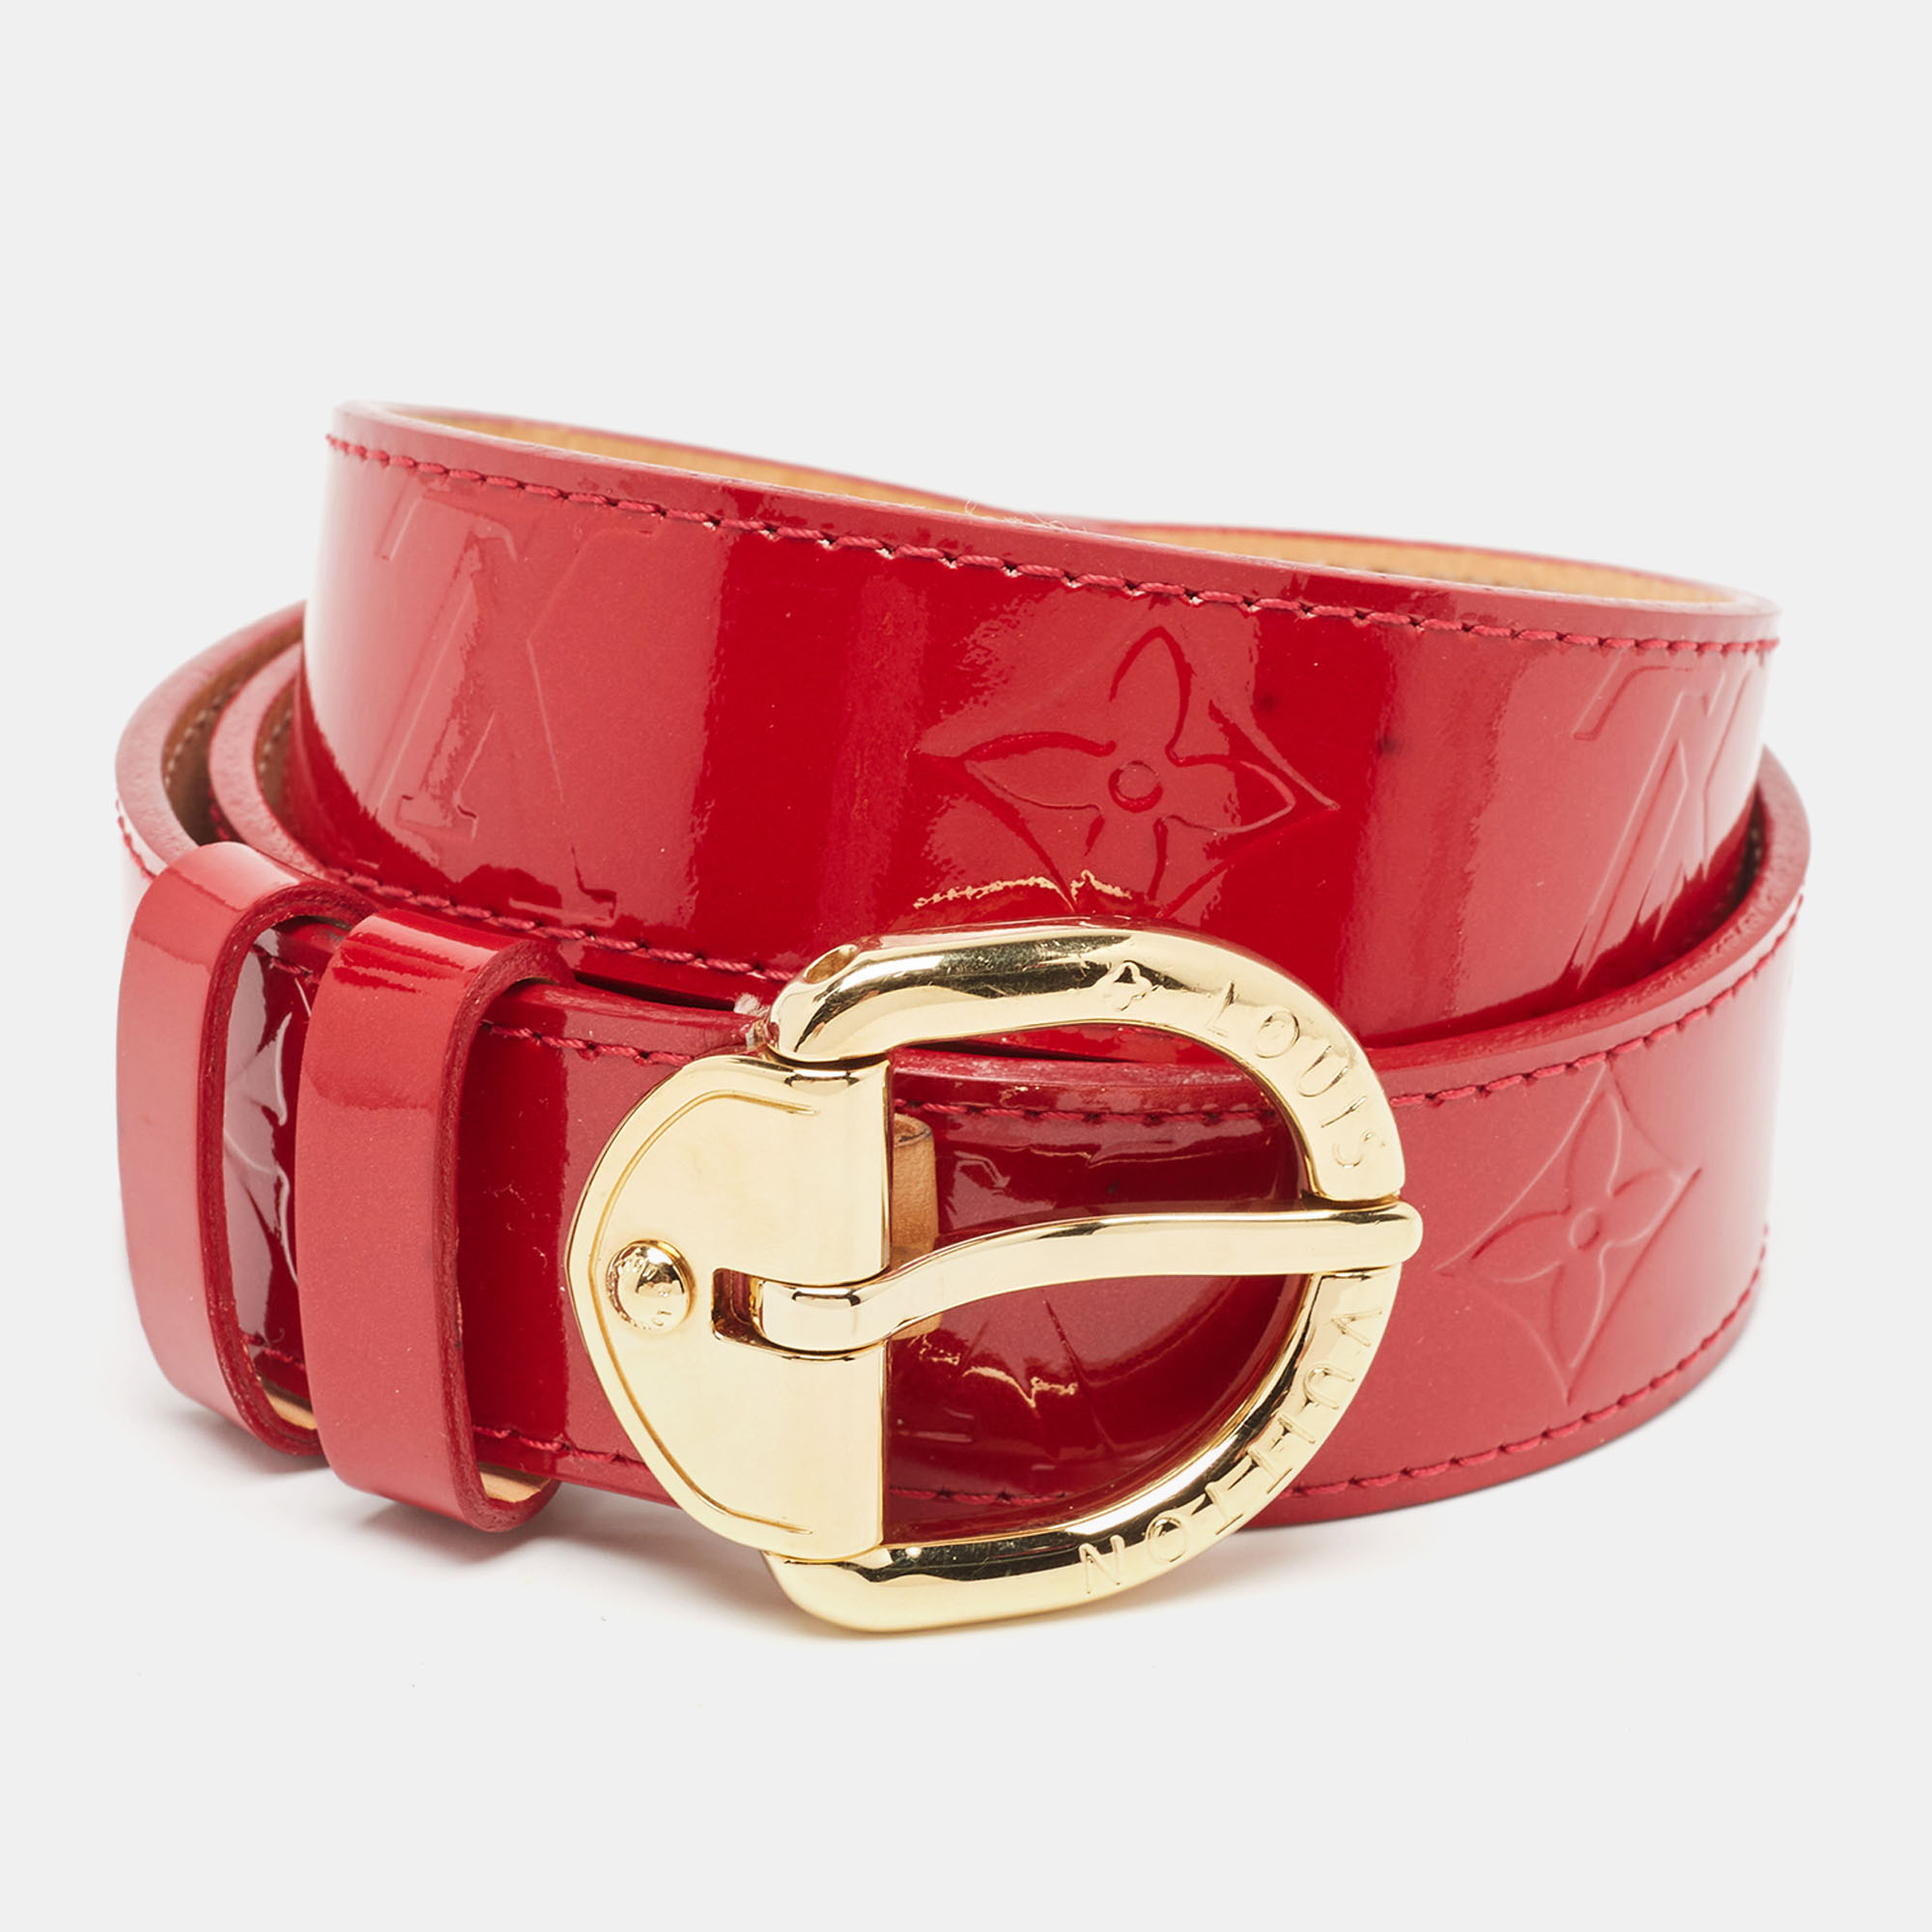 Coming from the House of Louis Vuitton this belt will certainly add a luxurious element to your entire ensemble. It is made using the red Monogram Vernis with a gold toned logo engraved buckle added to the front. The length of this belt measures 80 cm. Own this gorgeous LV belt today